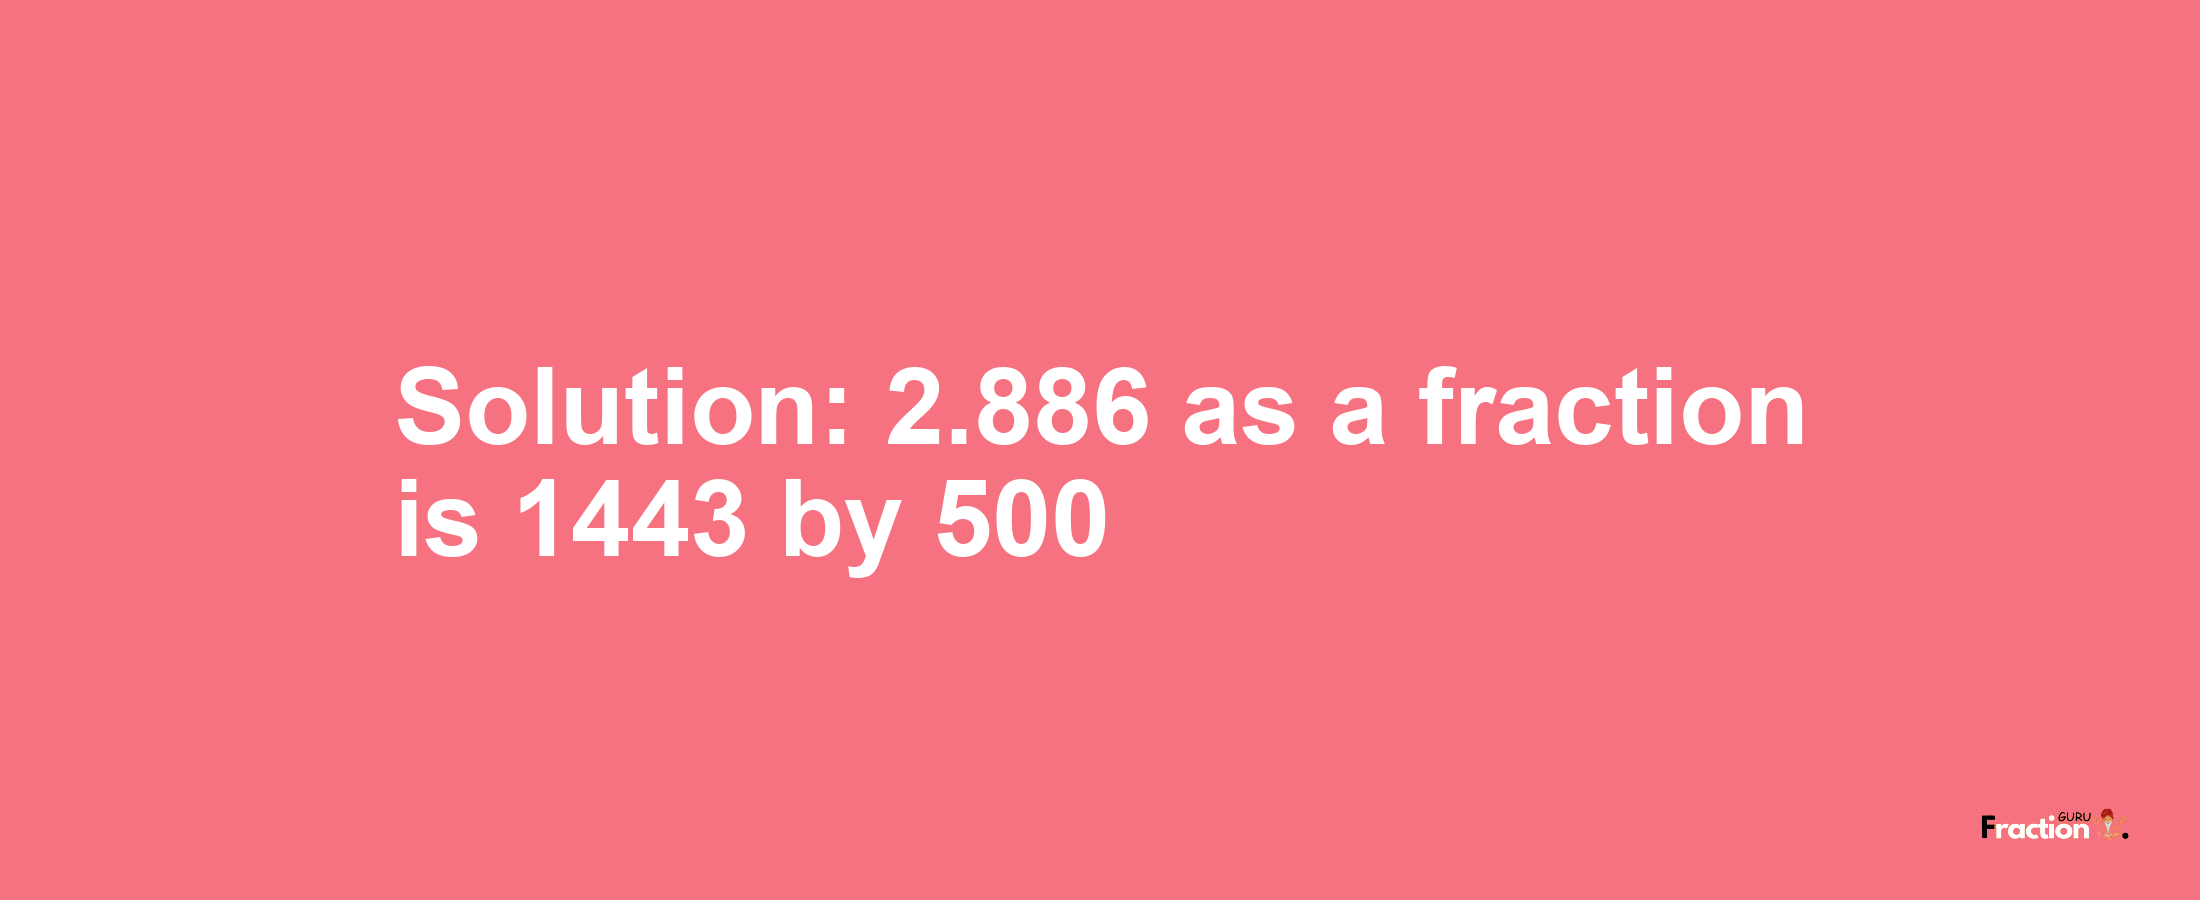 Solution:2.886 as a fraction is 1443/500